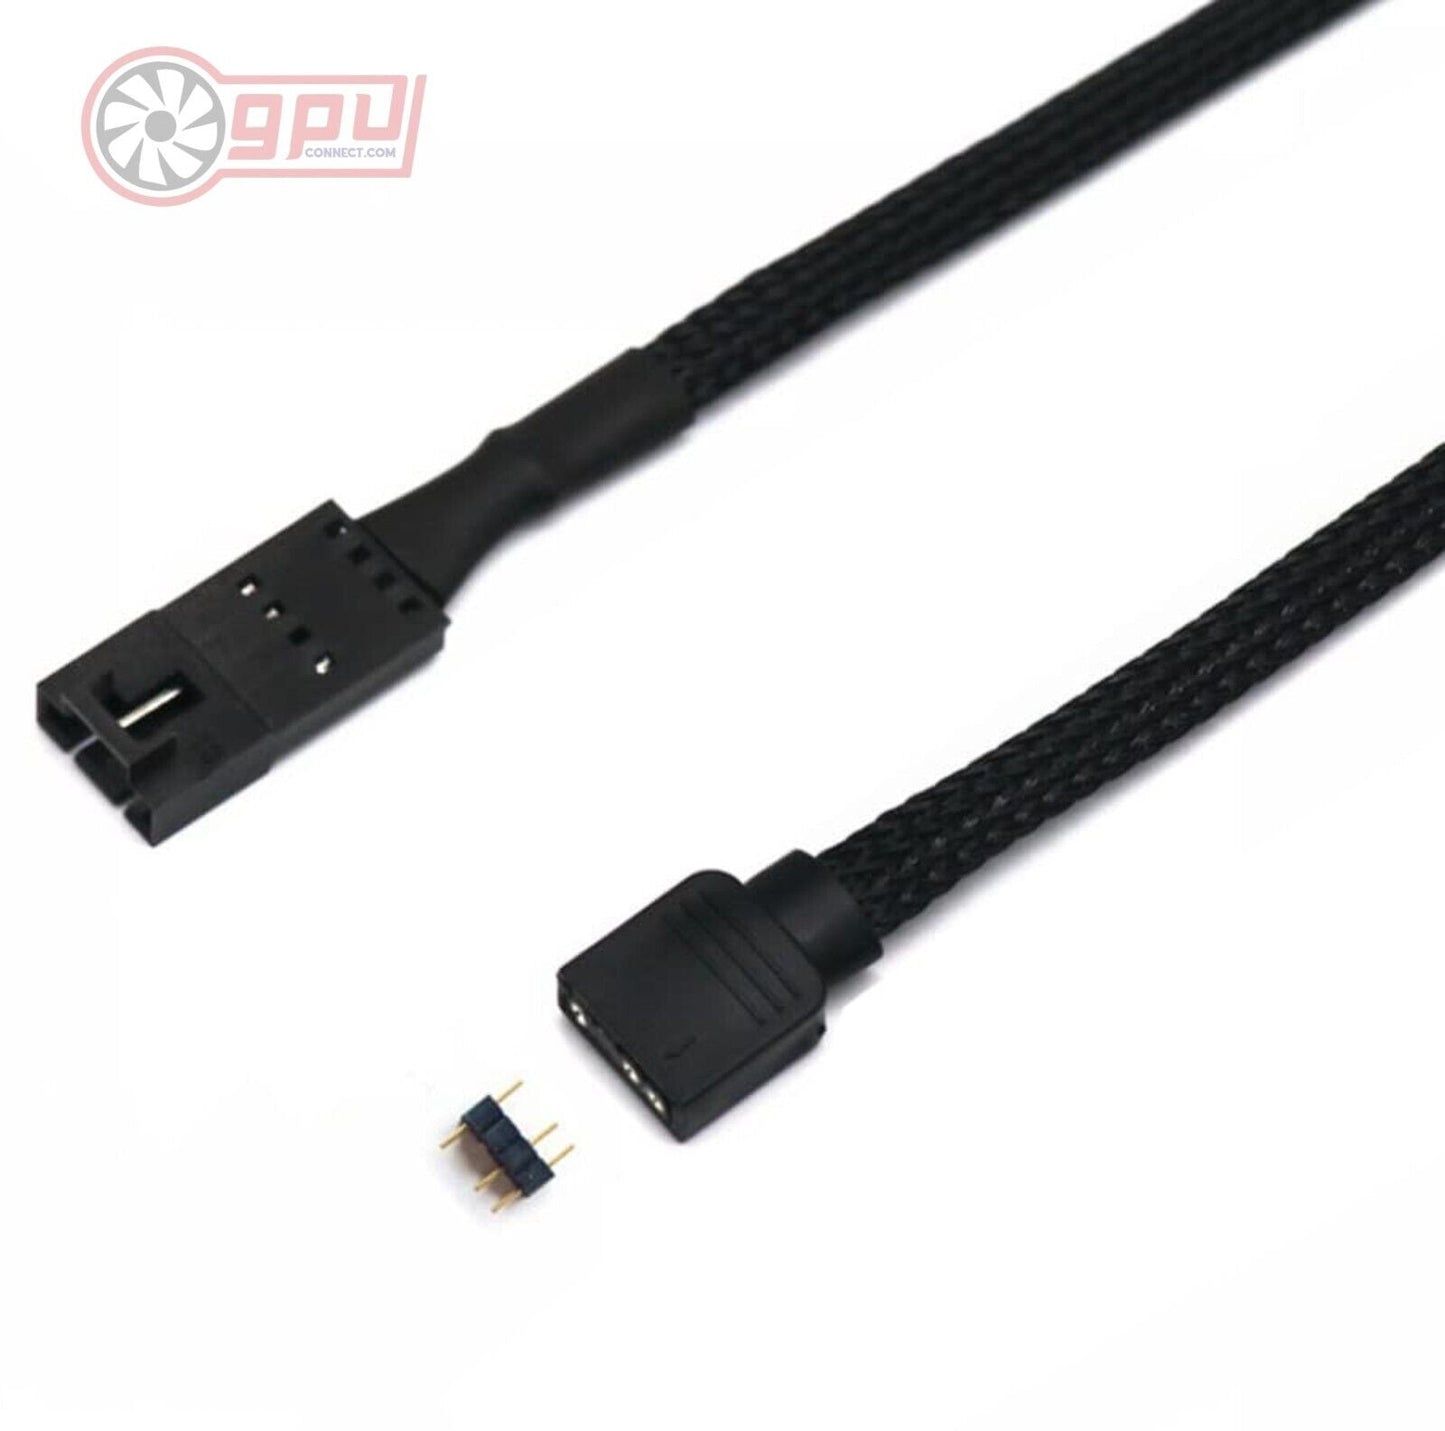 Corsair RGB Fan Extension 3 Pin 4 Pin Adapter LED Cable - 50cm Black Braided - GPUCONNECT.COM